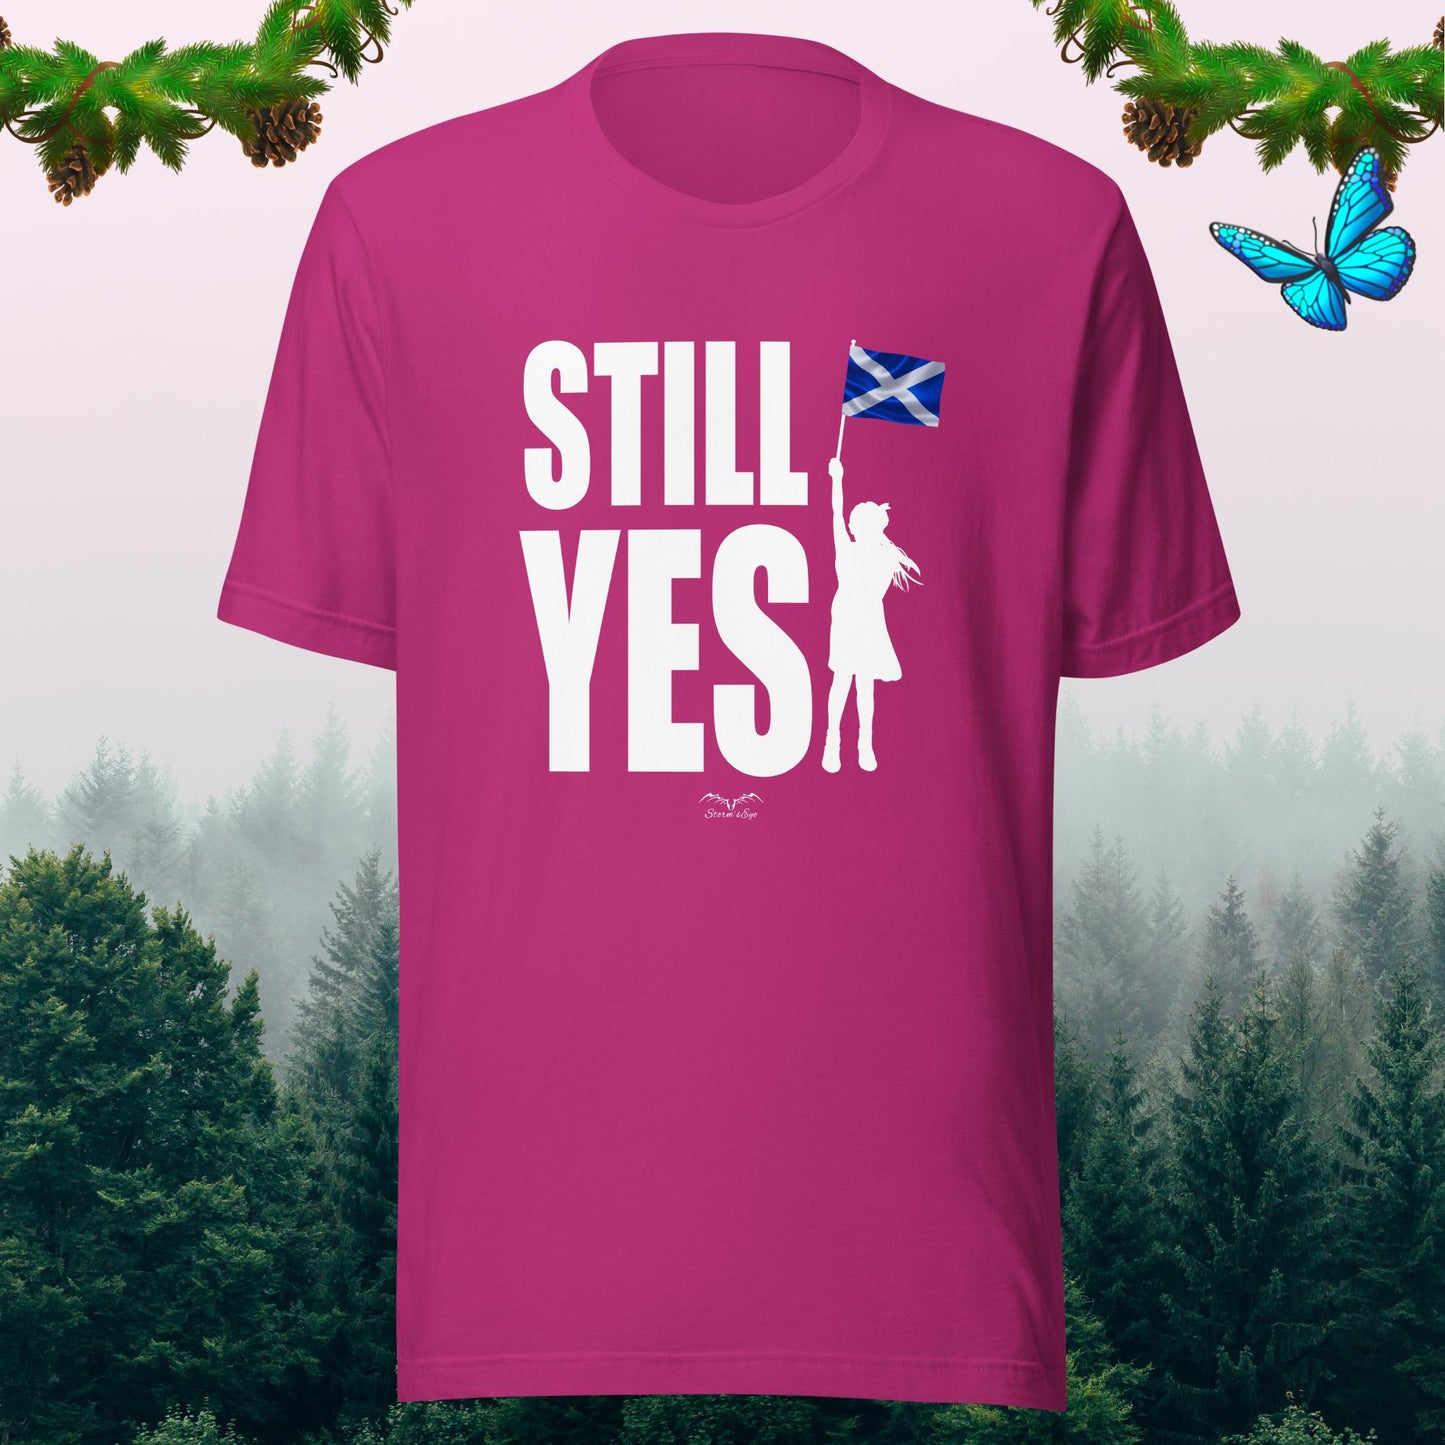 Still Yes Scottish Independence T-shirt bright pink by stormseye design